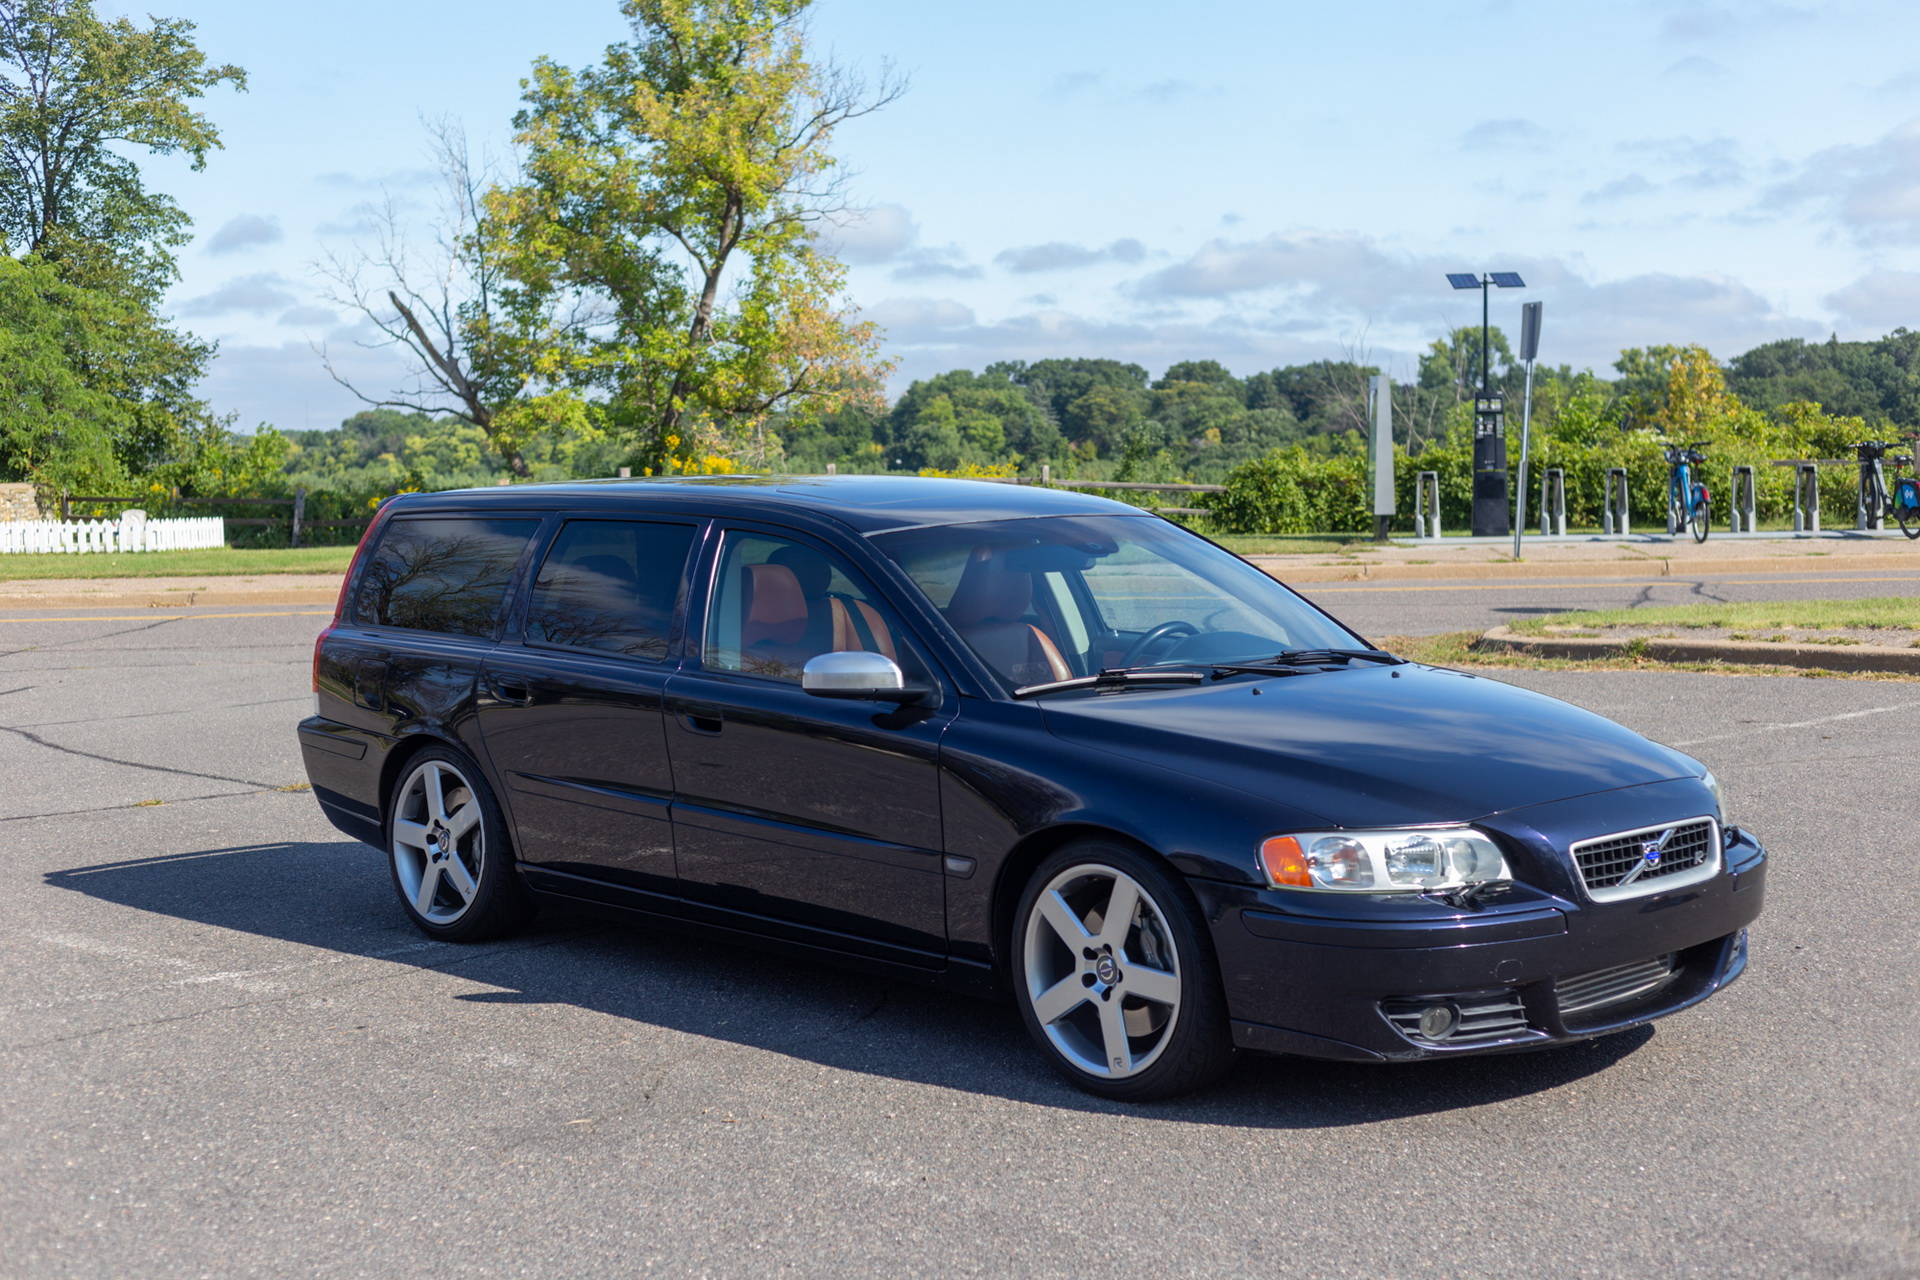 Volvo V70R ME7.0 Stage 3 372hp 517nm 1.6bar boost by ChiptuneRS